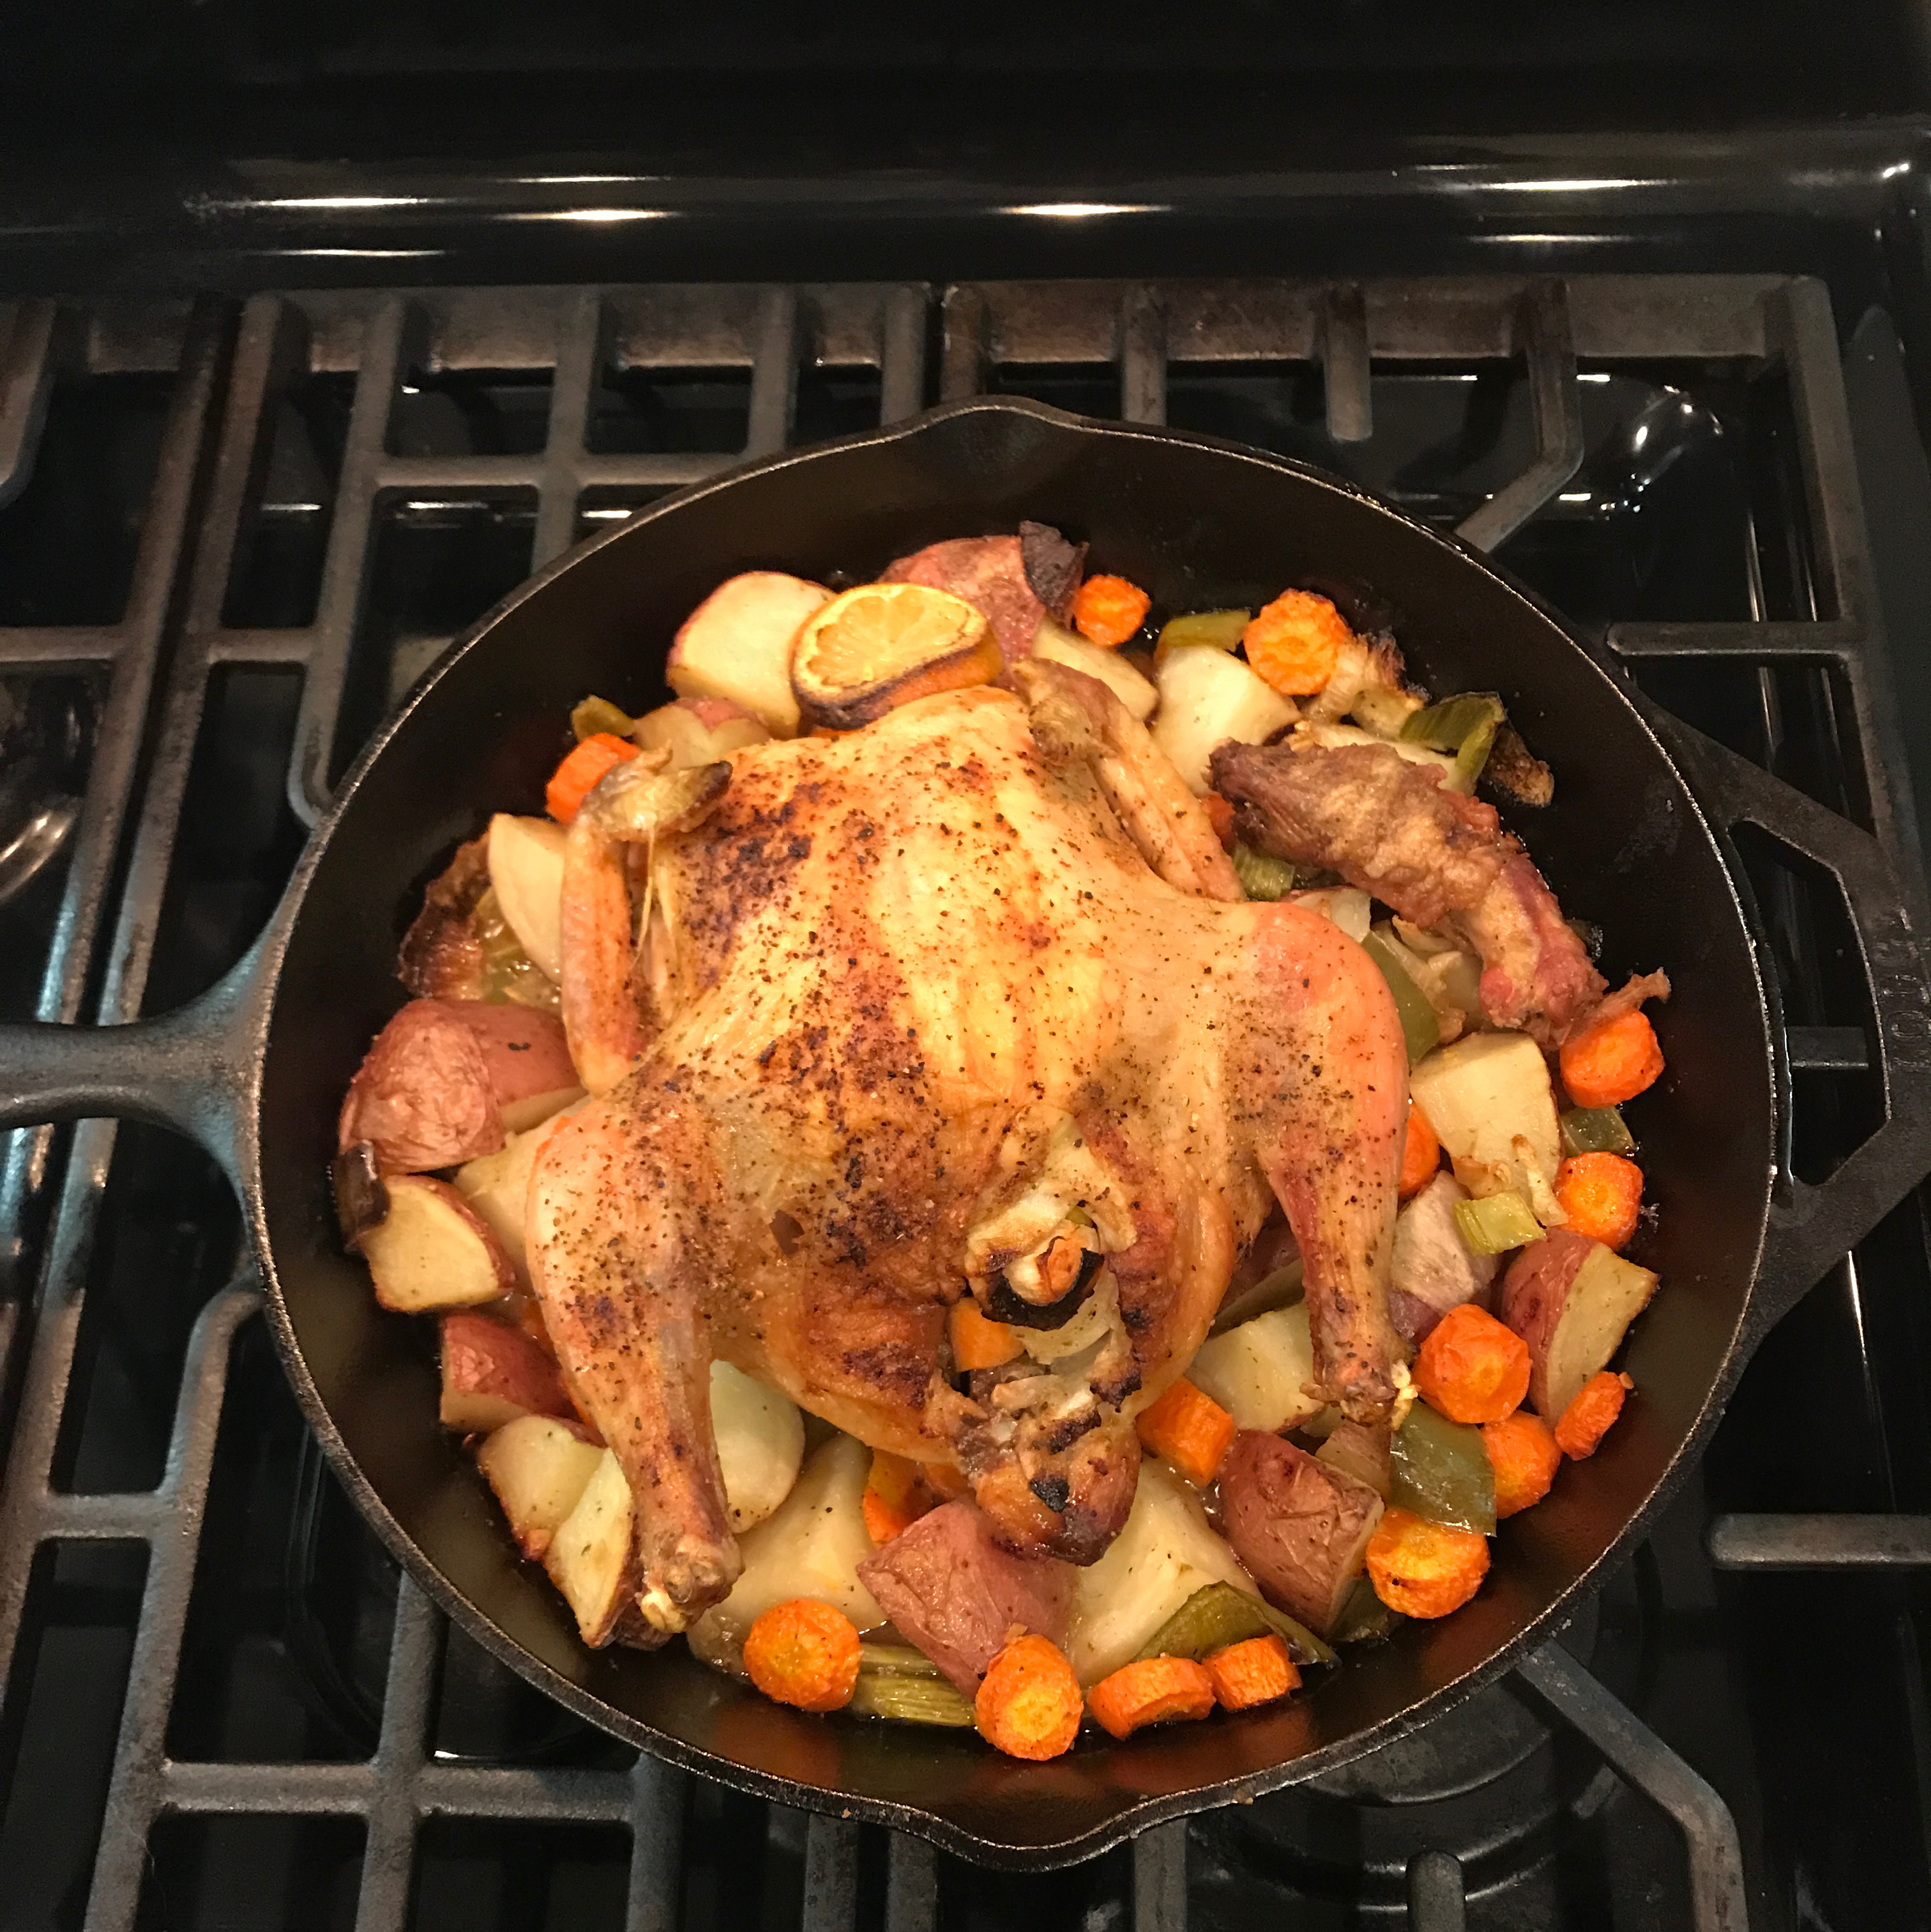 Roast Chicken and Vegetables